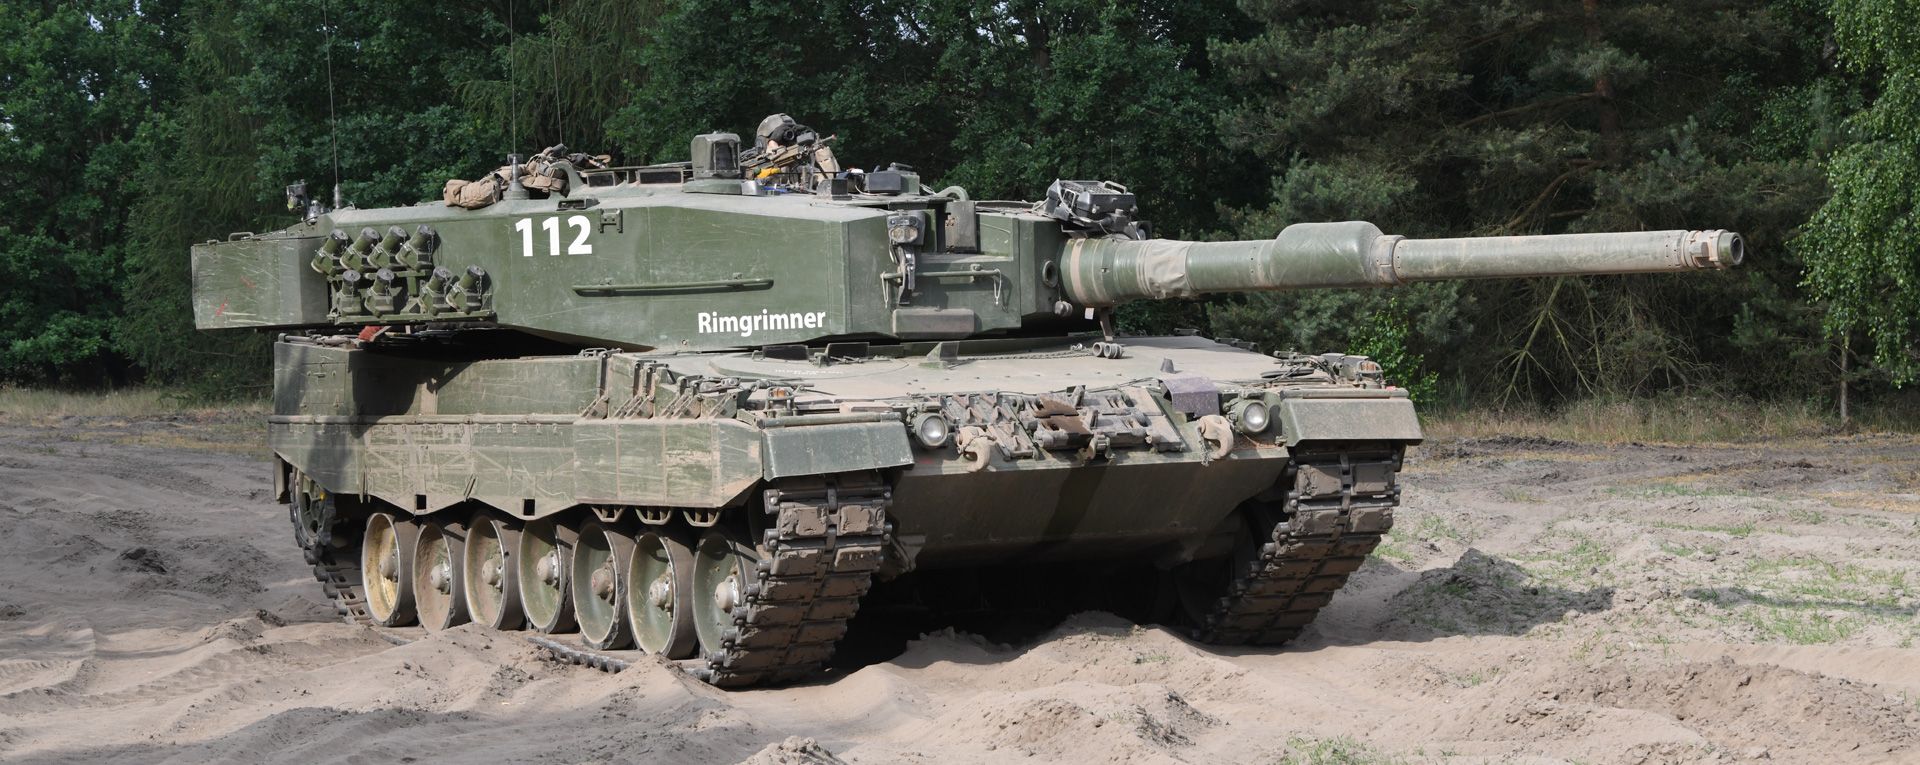 More Leopard Tanks to the Czech Army